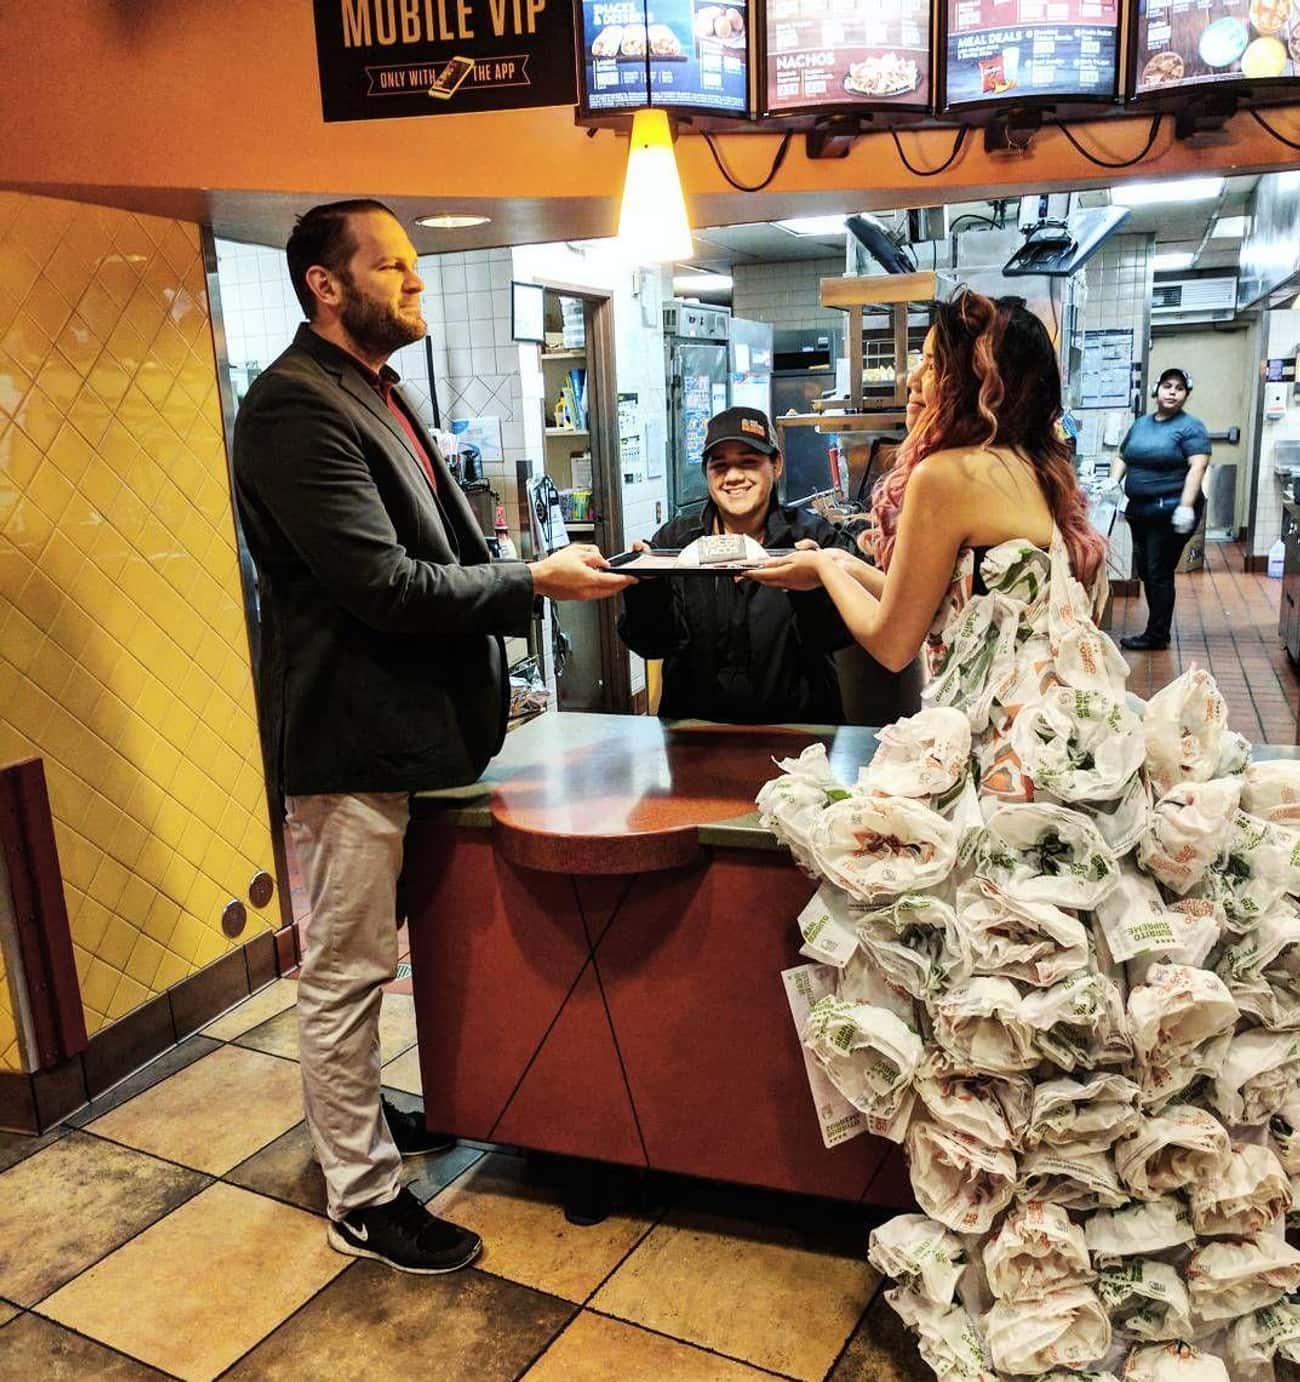 If You Don't Get Married In A Dress Made Of Taco Bell Wrappers, Are You Really Even Married?